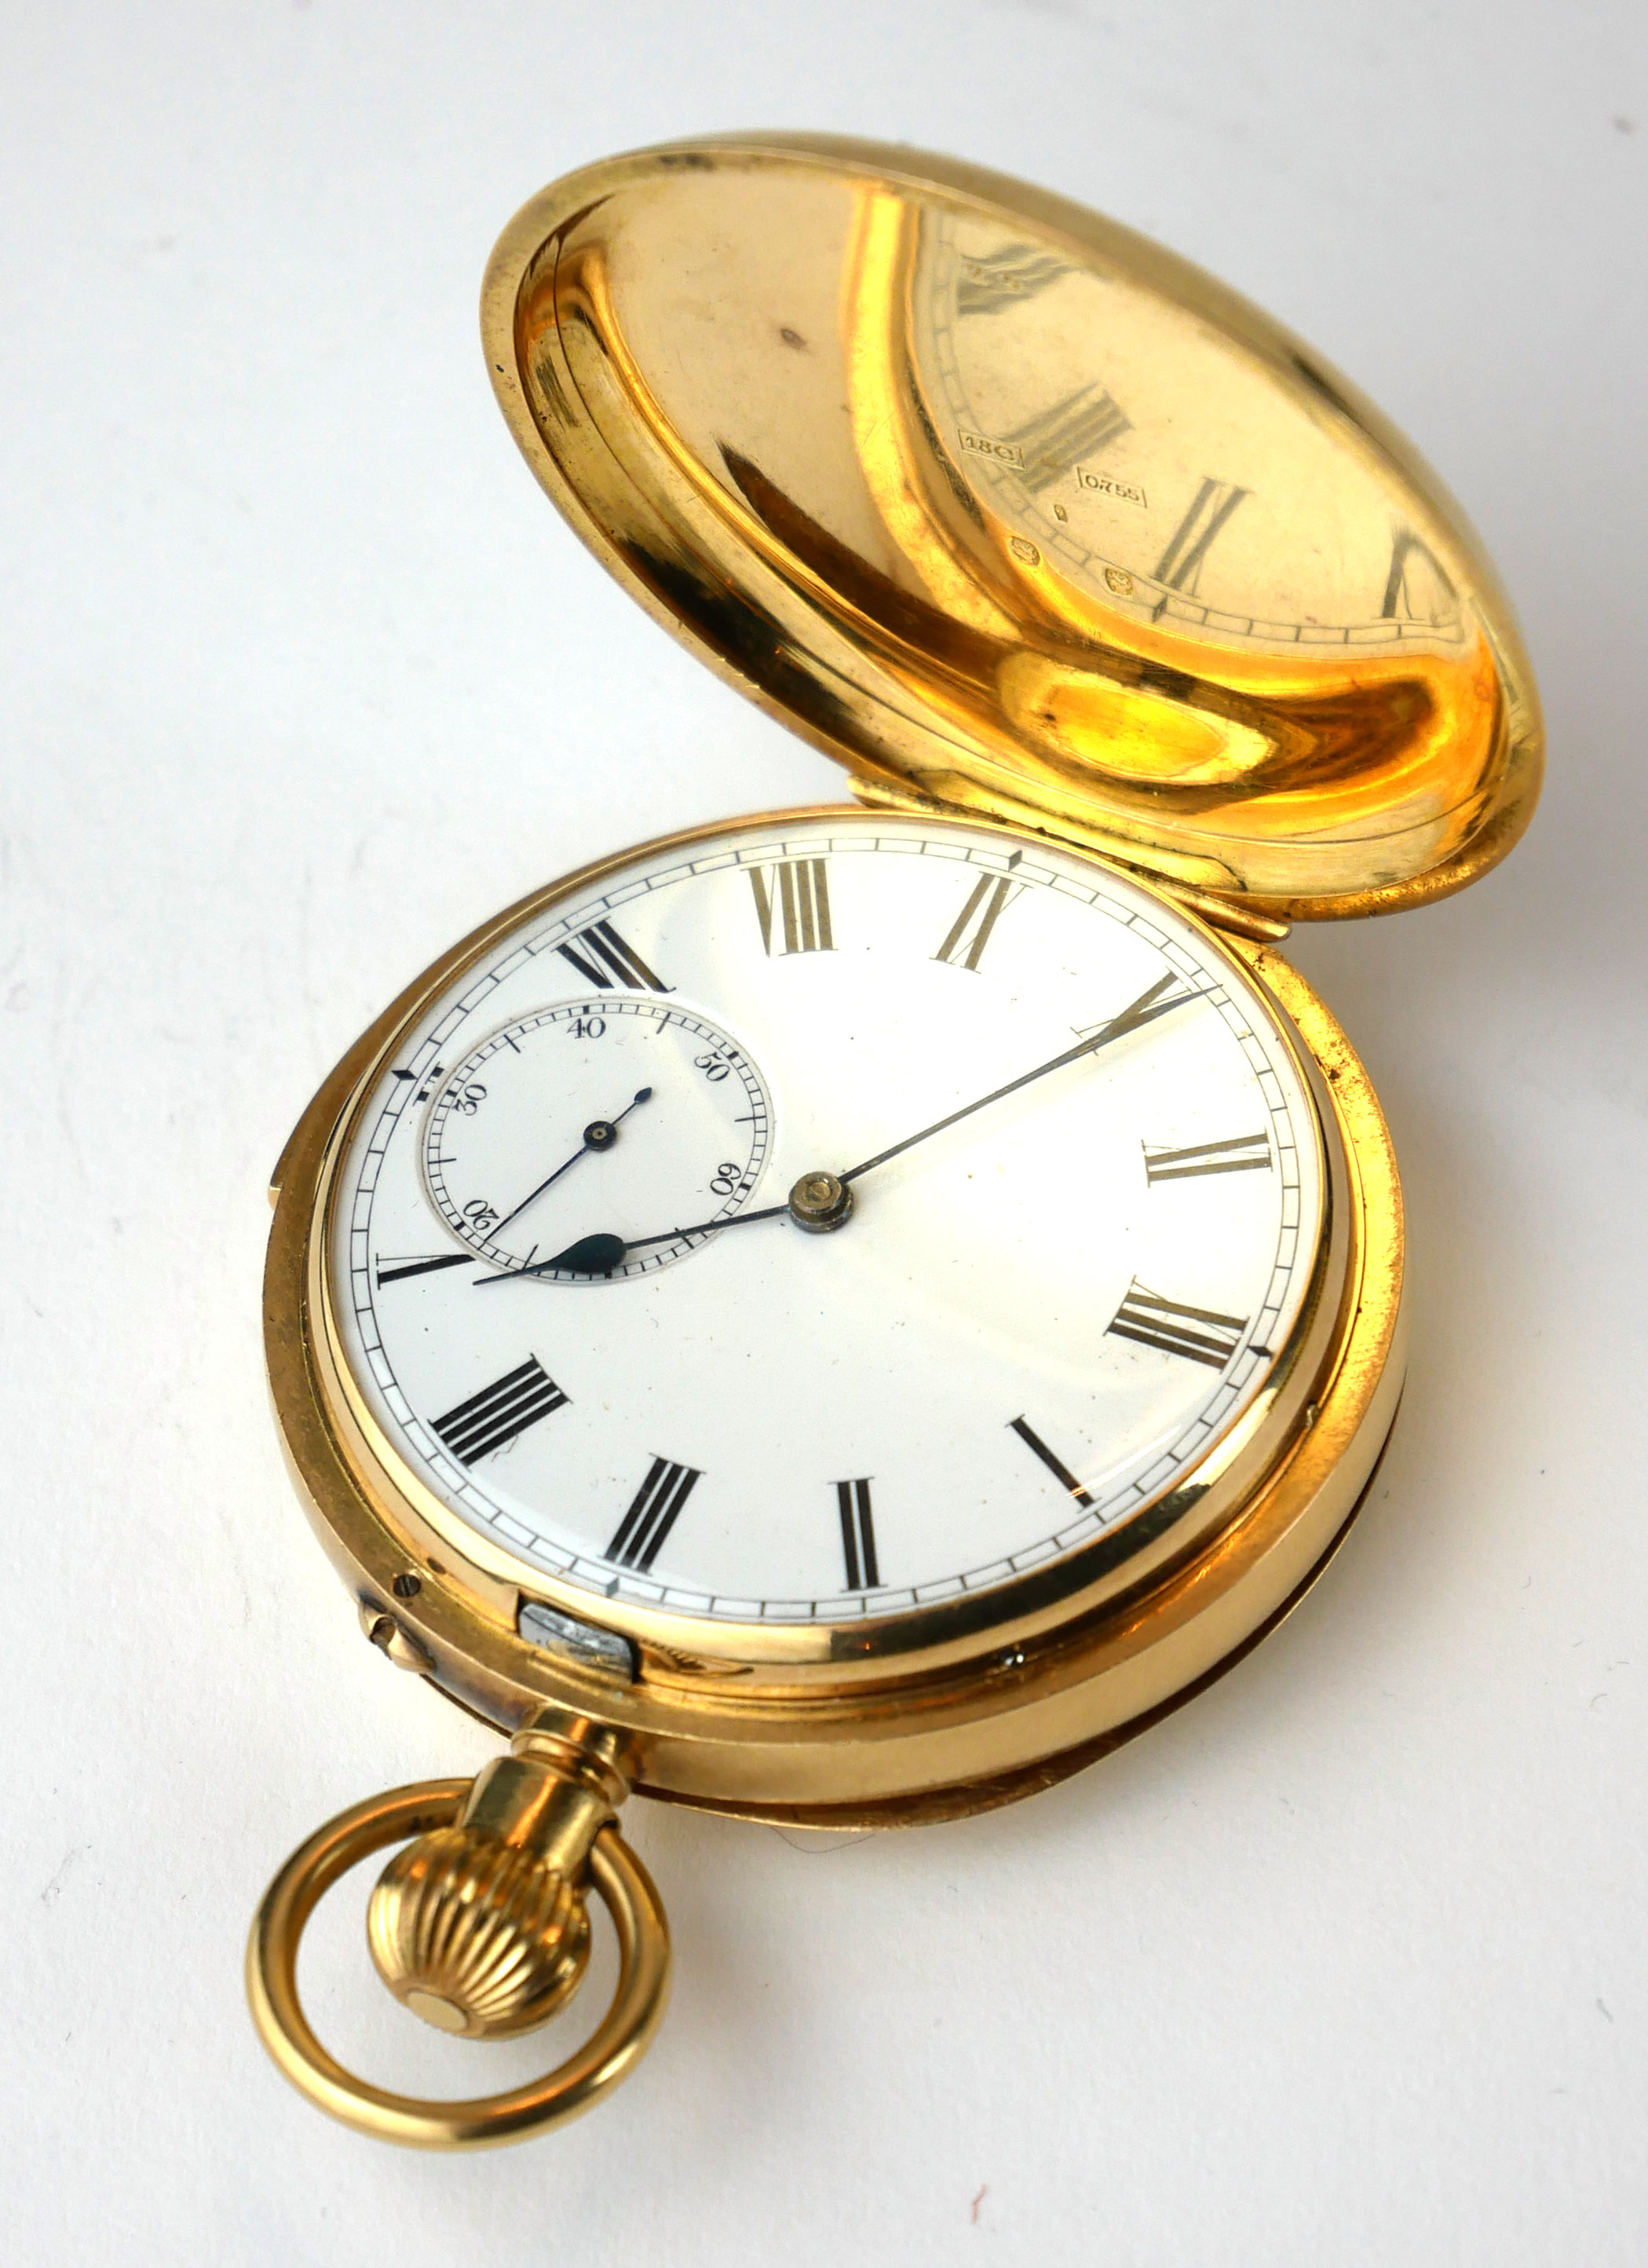 AN EARLY 20TH CENTURY 18CT GOLD MINUTE REPEATER GENT'S FULL HUNTER POCKET WATCH Having an engraved